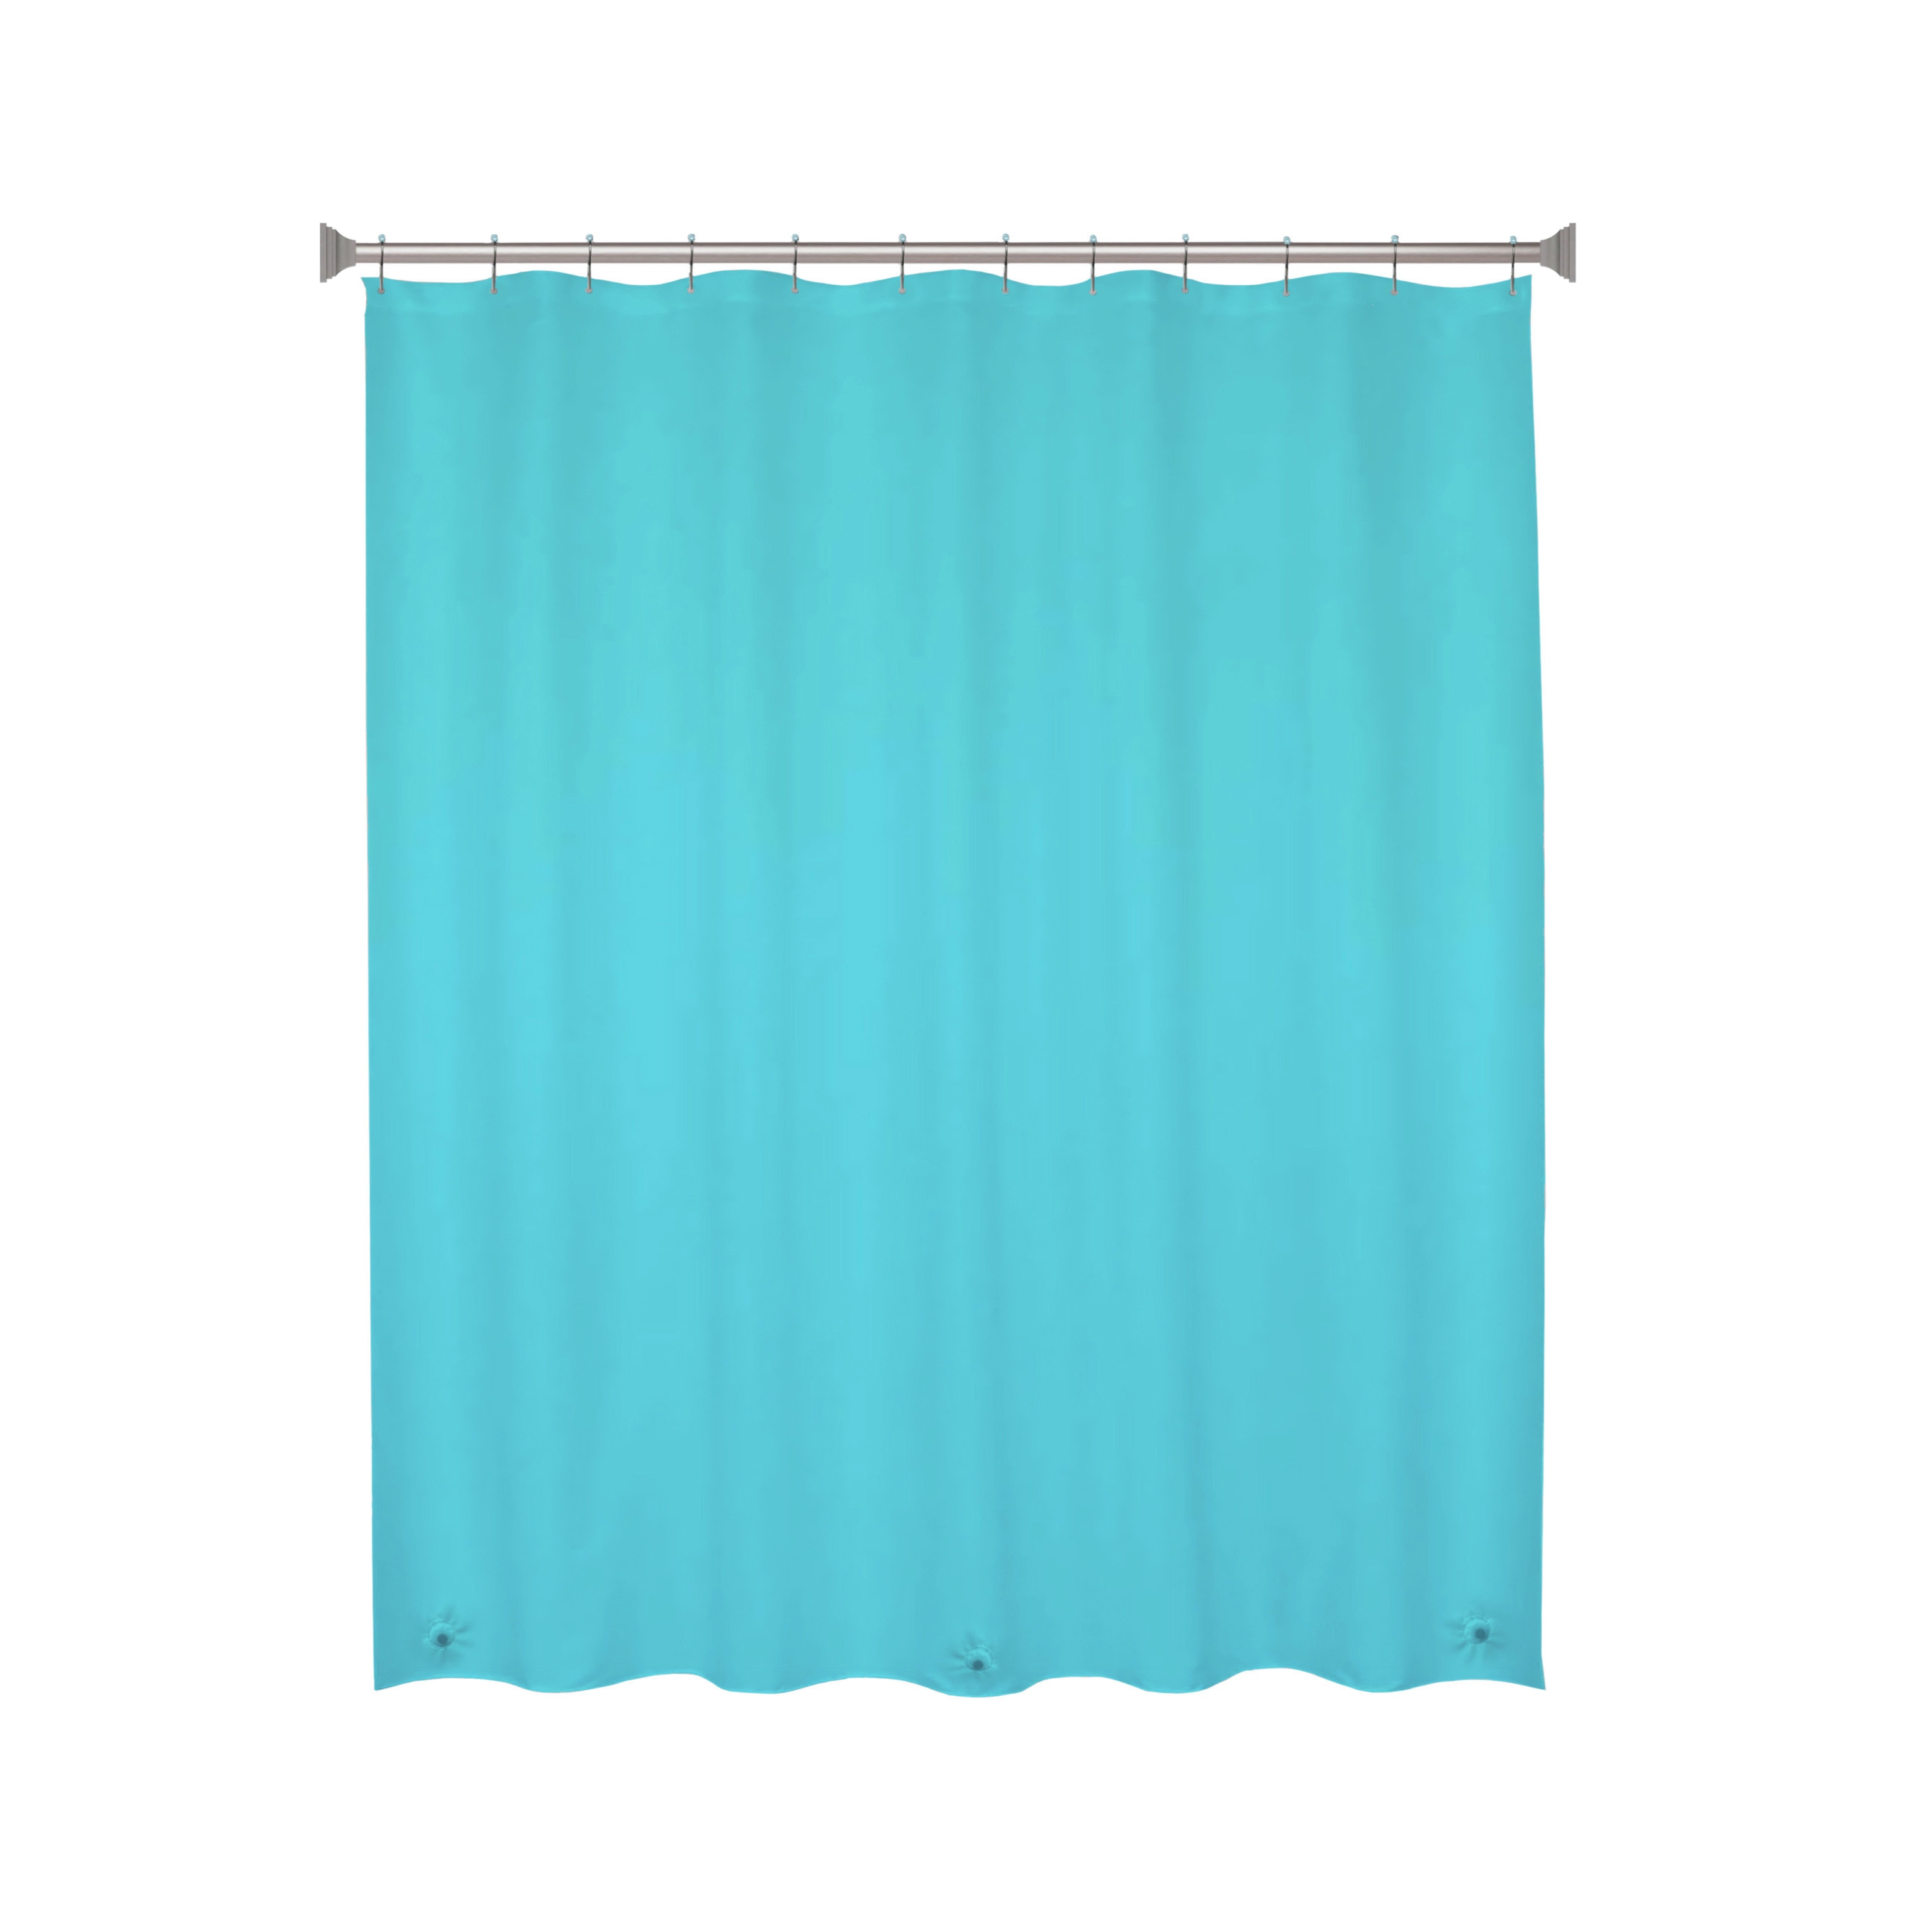 BTTN Teal Linen Textured Shower Curtain, Heavy Duty Waterproof Fabric  Shower Curtain Set with 12 Plastic Hooks, Turquoise Simple Hotel Luxury